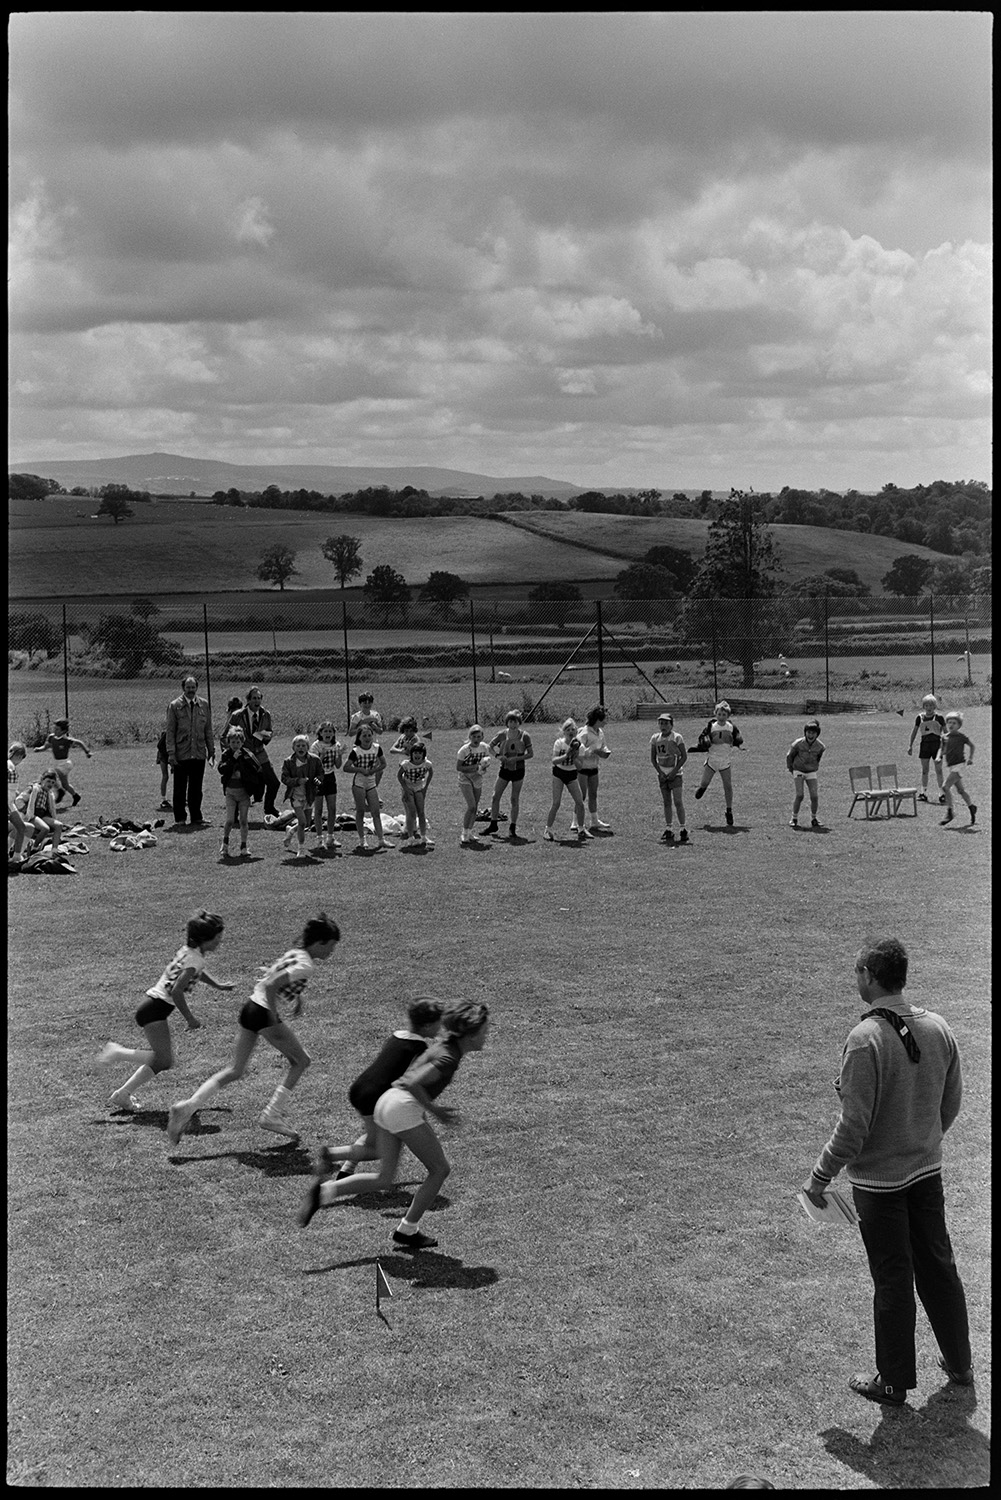 School sports day, children, races and spectators. 
[Children taking part in a running race on the school field at Winkleigh School at a sports day where children from Black Torrington School, Northlew School, Dolton School and Highampton School were competing. Other children are cheering from the side of the track.]